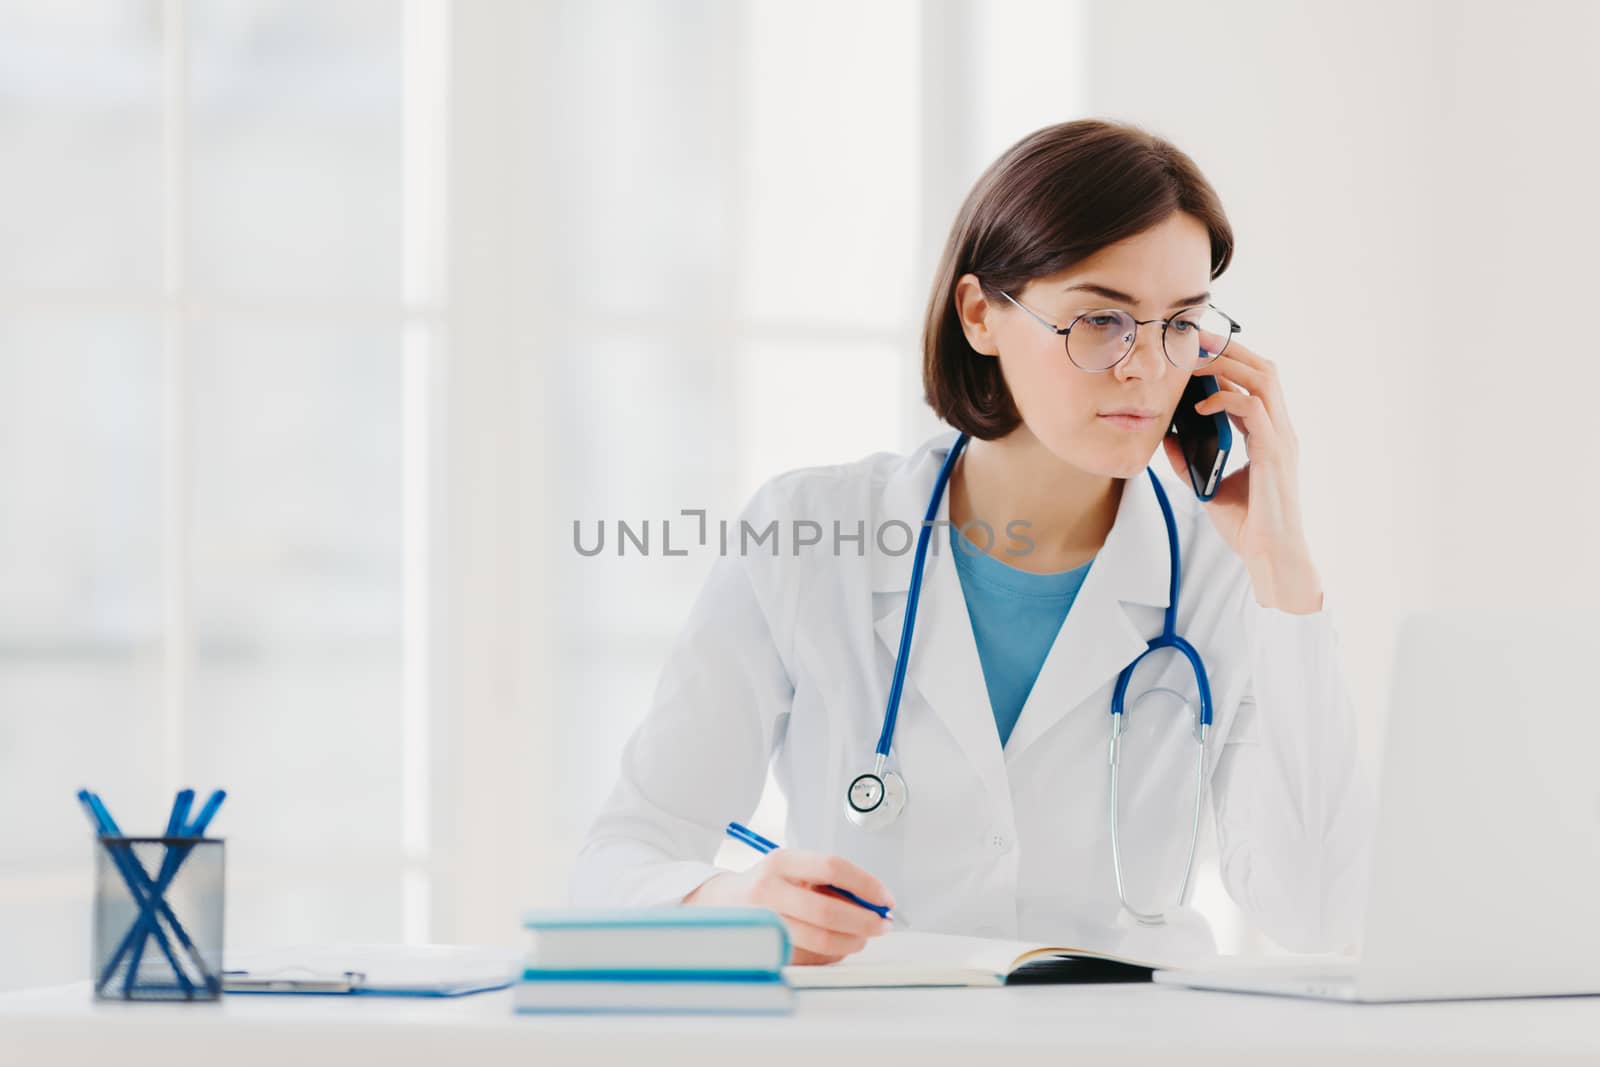 Heathcare personnel, medicine concept. Serious brunette female doctor focused at modern laptop computer, rewrites necessary information, talks on mobile phone, calls someone, has serious look by vkstock